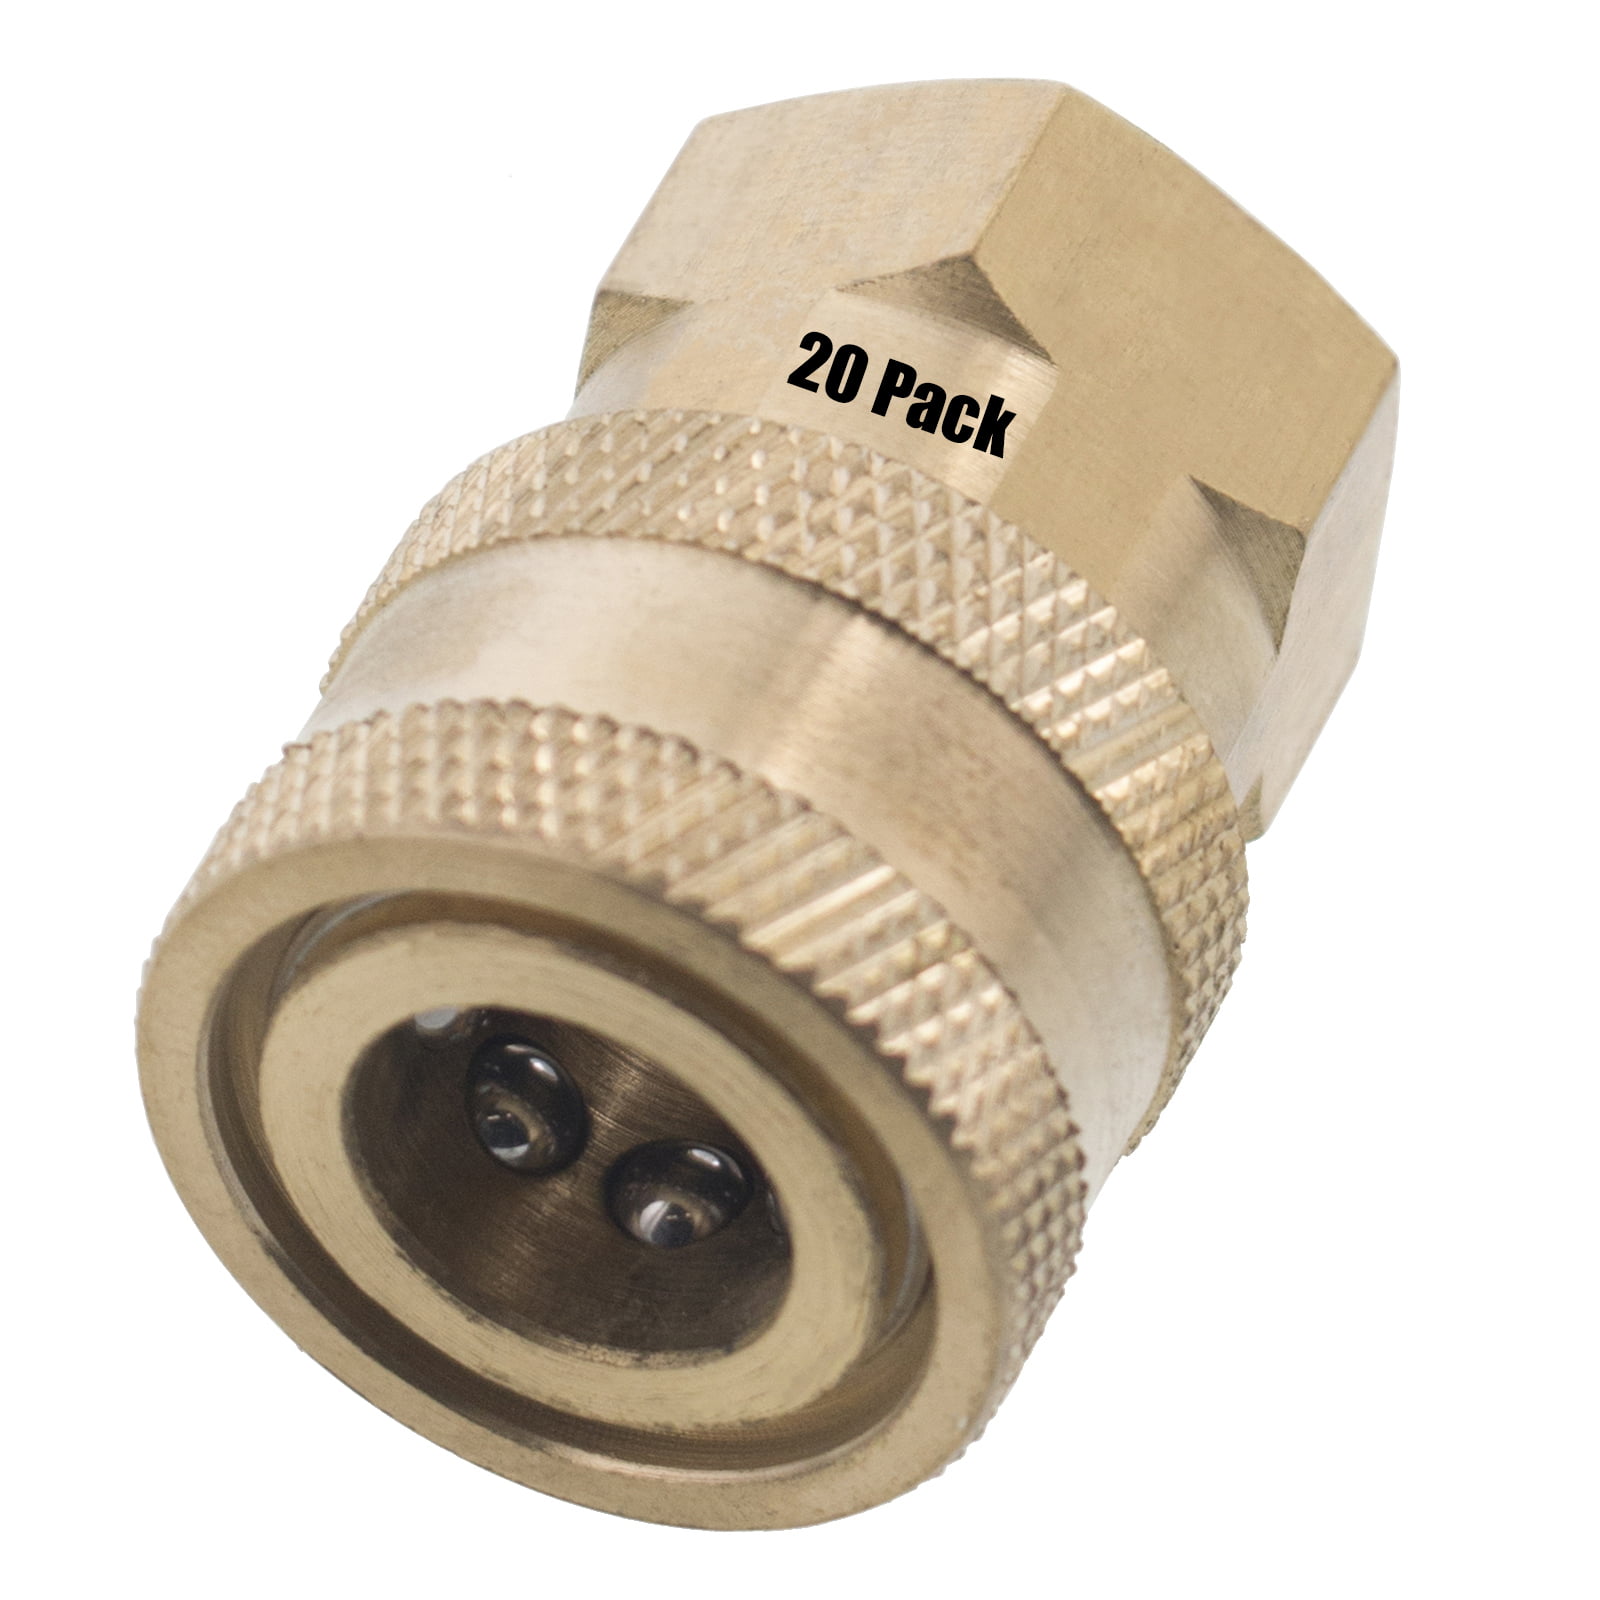 Pressure WasherQuick Connect Socket1/4" Female NPTBrass4 Pack 